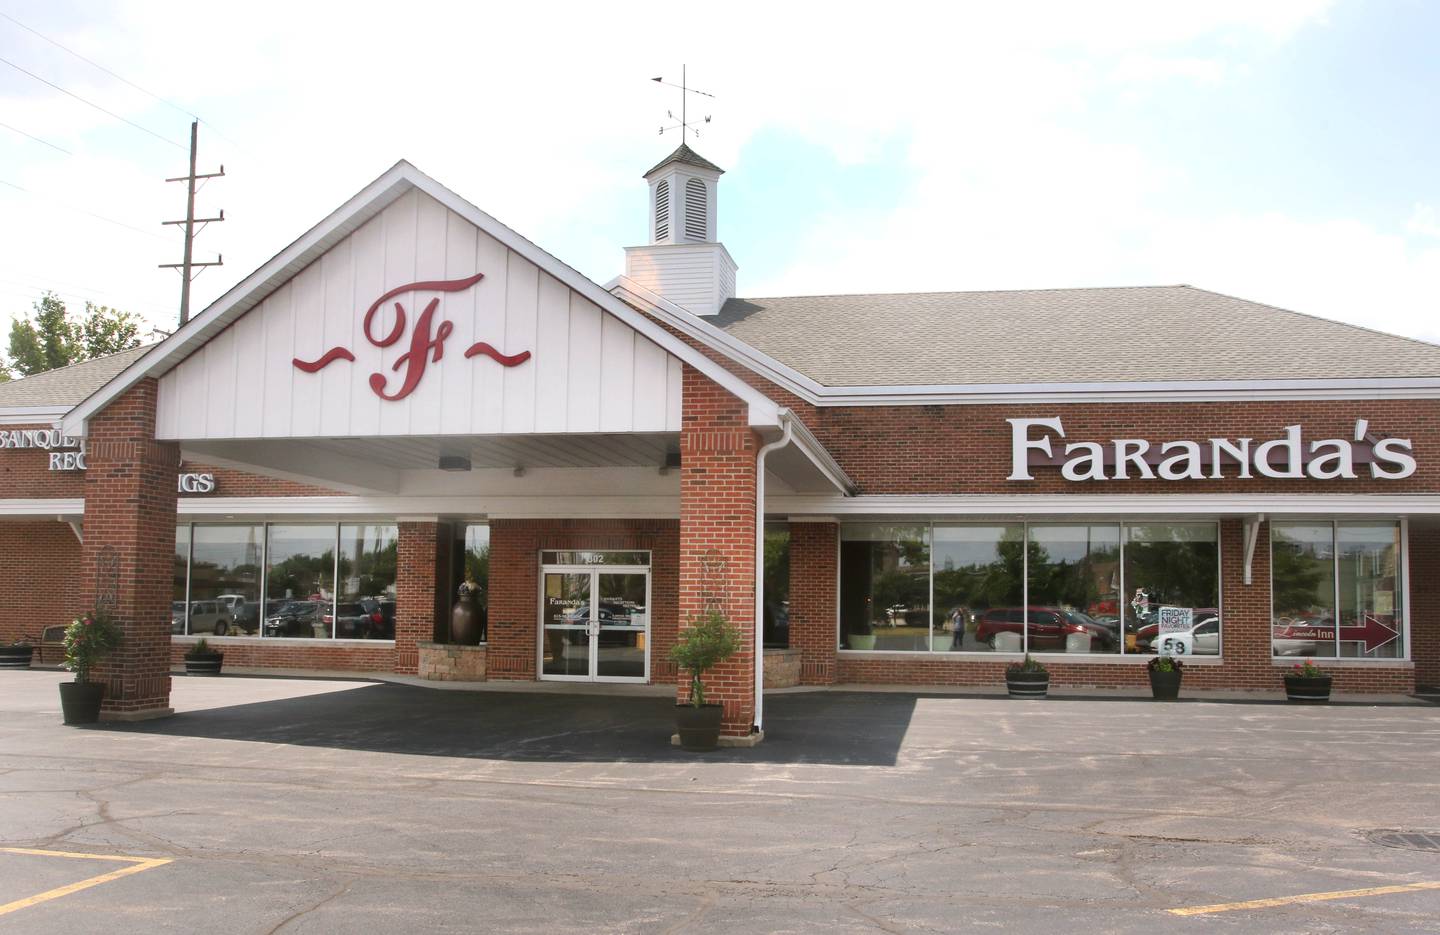 Faranda's Banquet Center is ready to go to full capacity when COVID-19 restrictions are lifted. The state will be entering Phase 5 of the Restore Illinois plan June 11 which will allow many locations and businesses to return to normal operation.